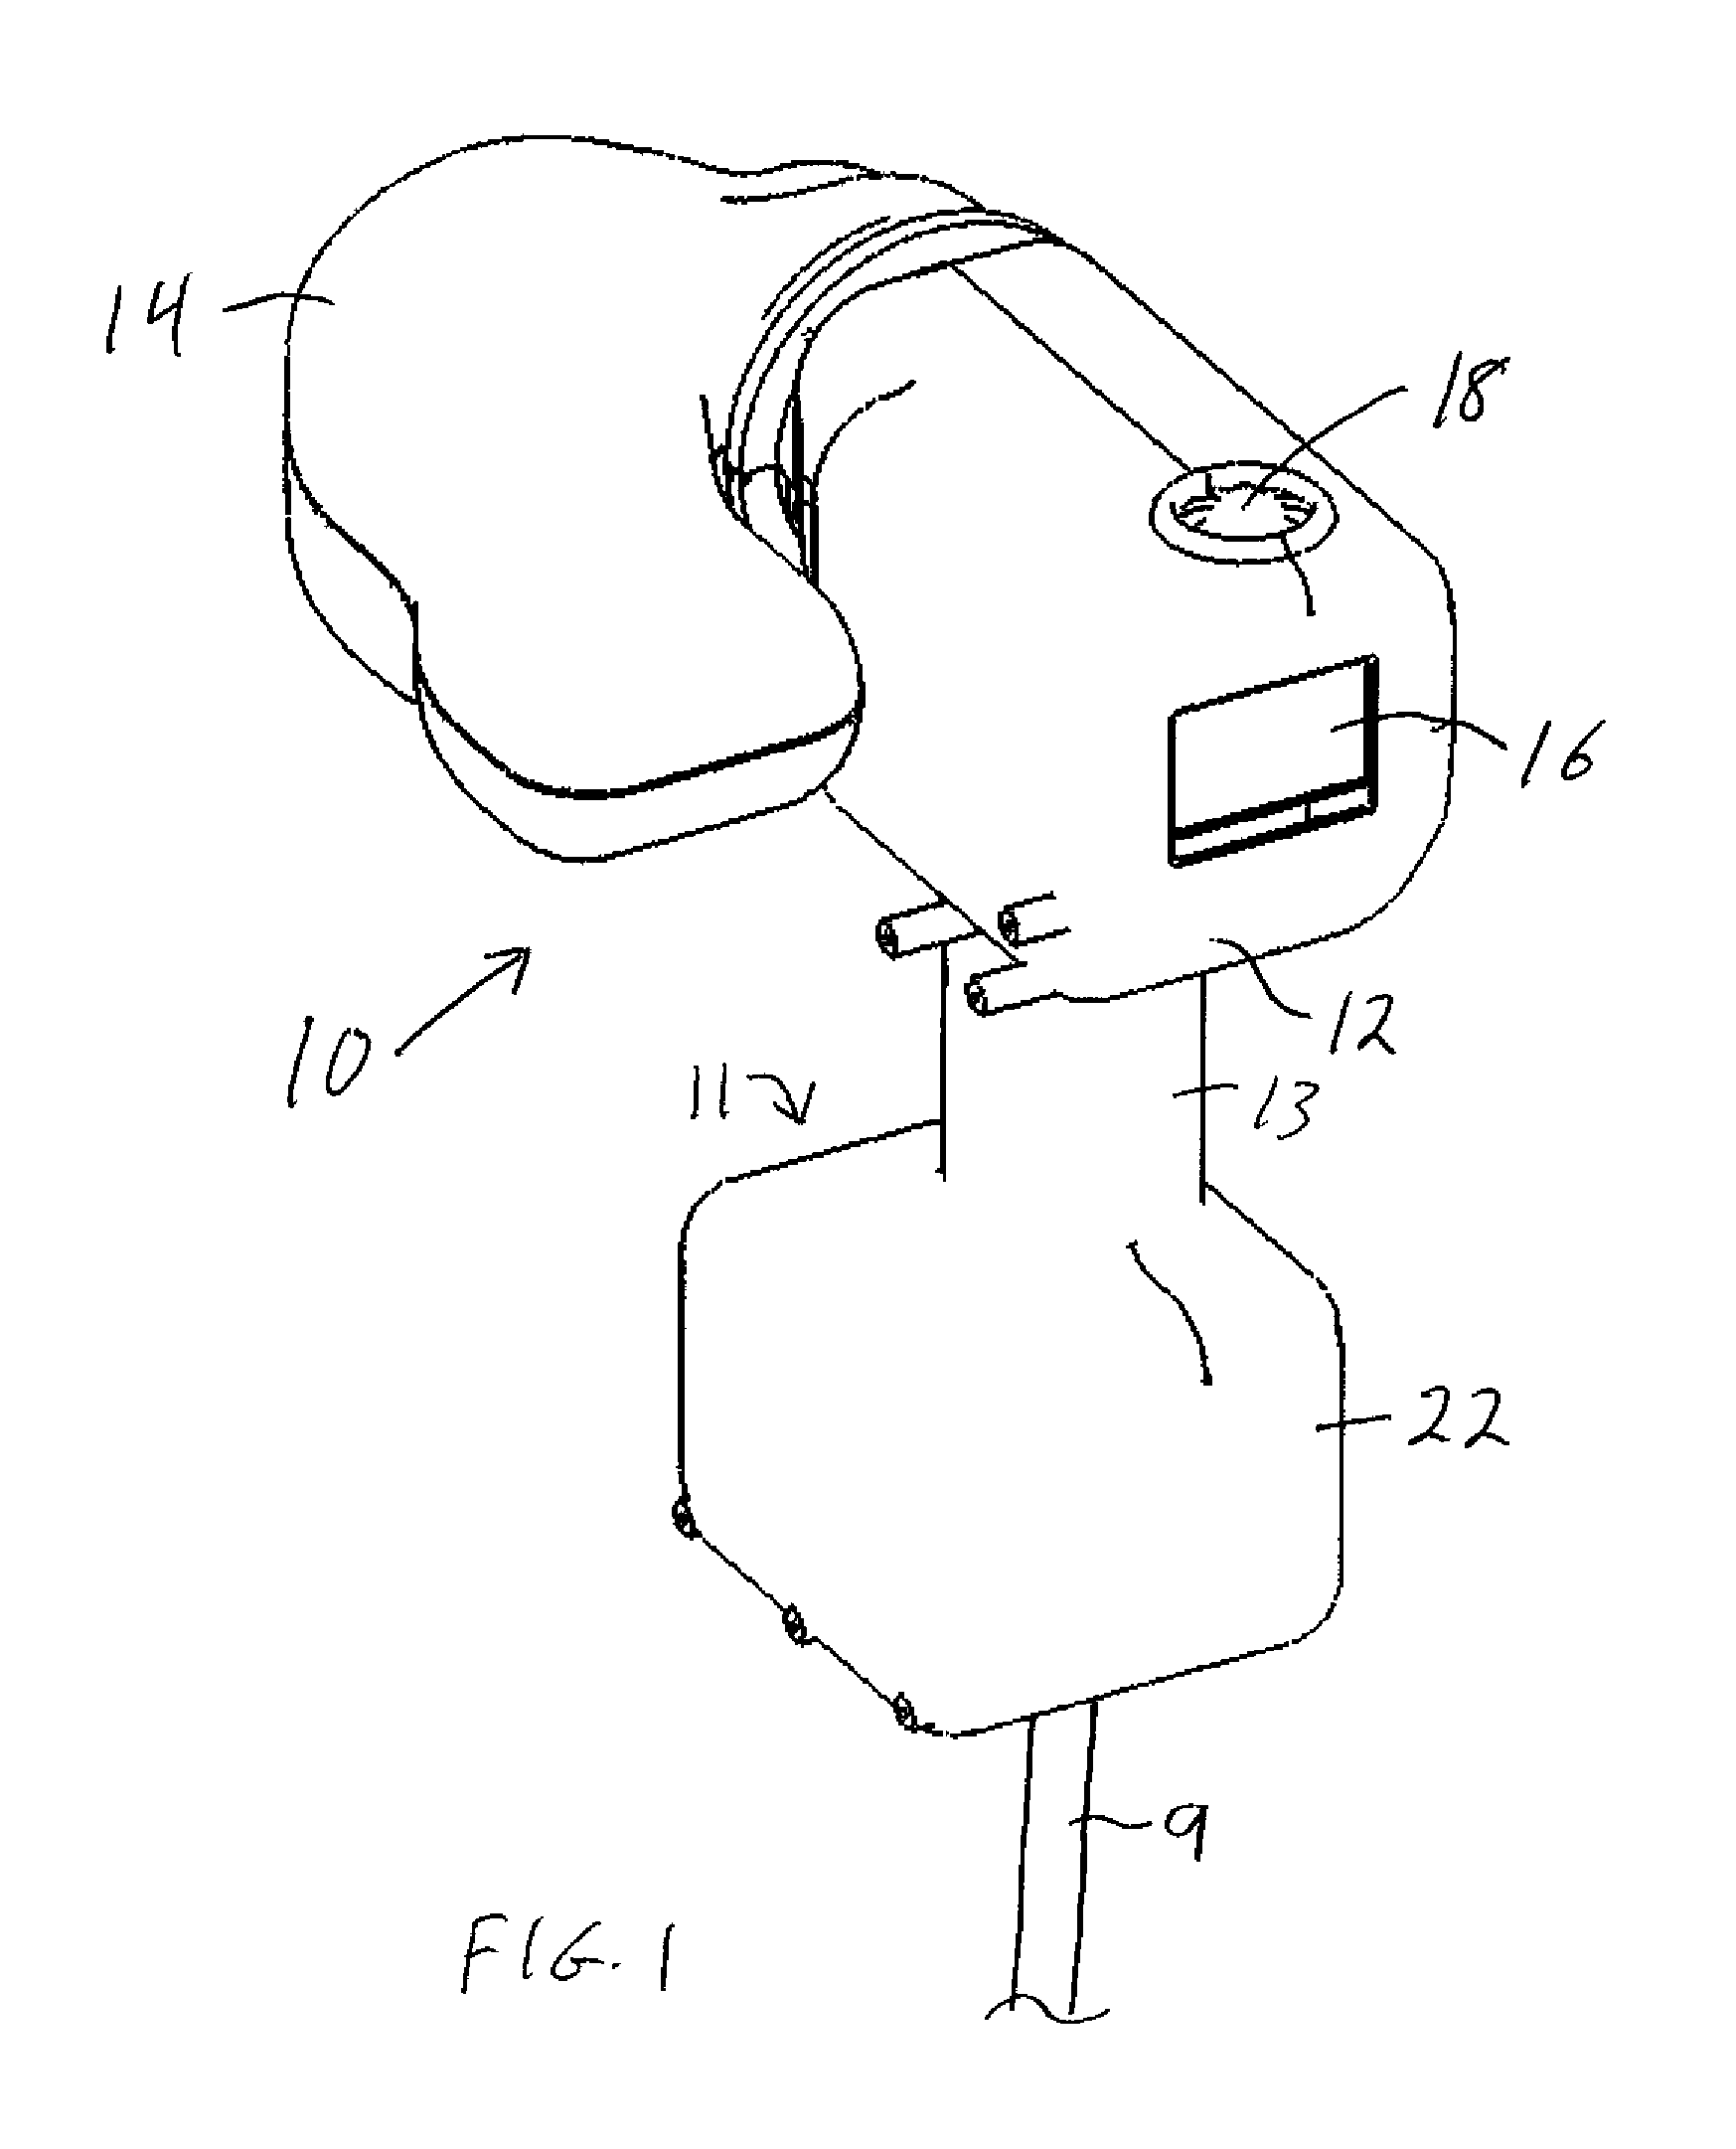 Portable Digital Medical Camera for Capturing Images of the Retina or the External Auditory Canal, and Methods of Use